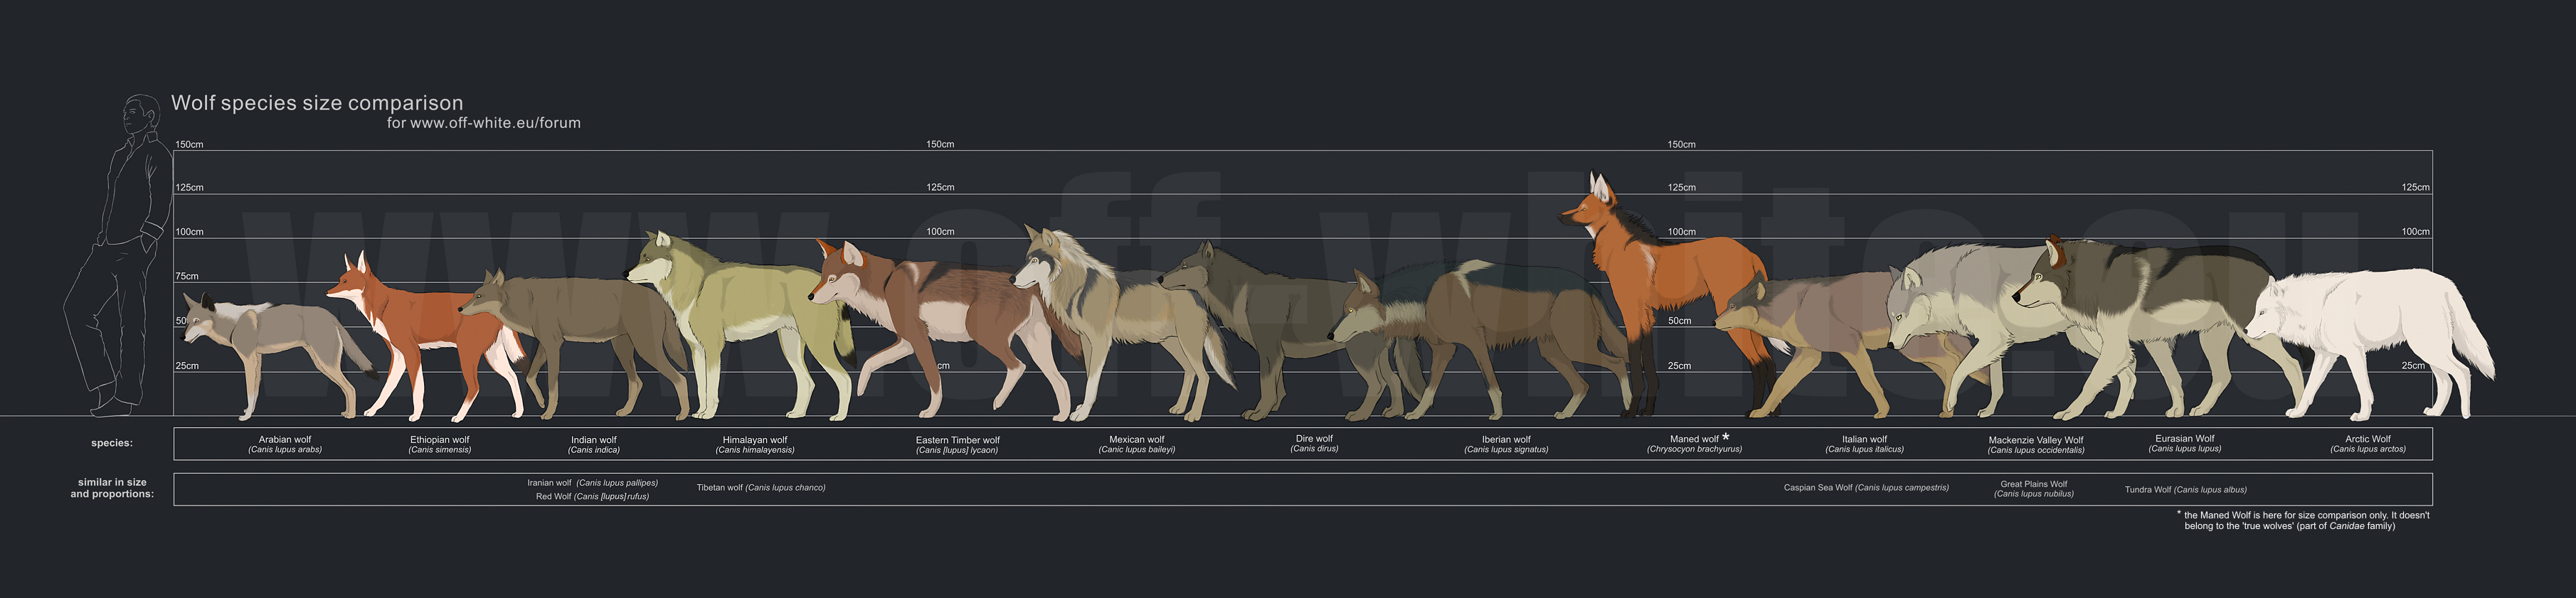 wolf_species_size_comparison_by_tanathe.